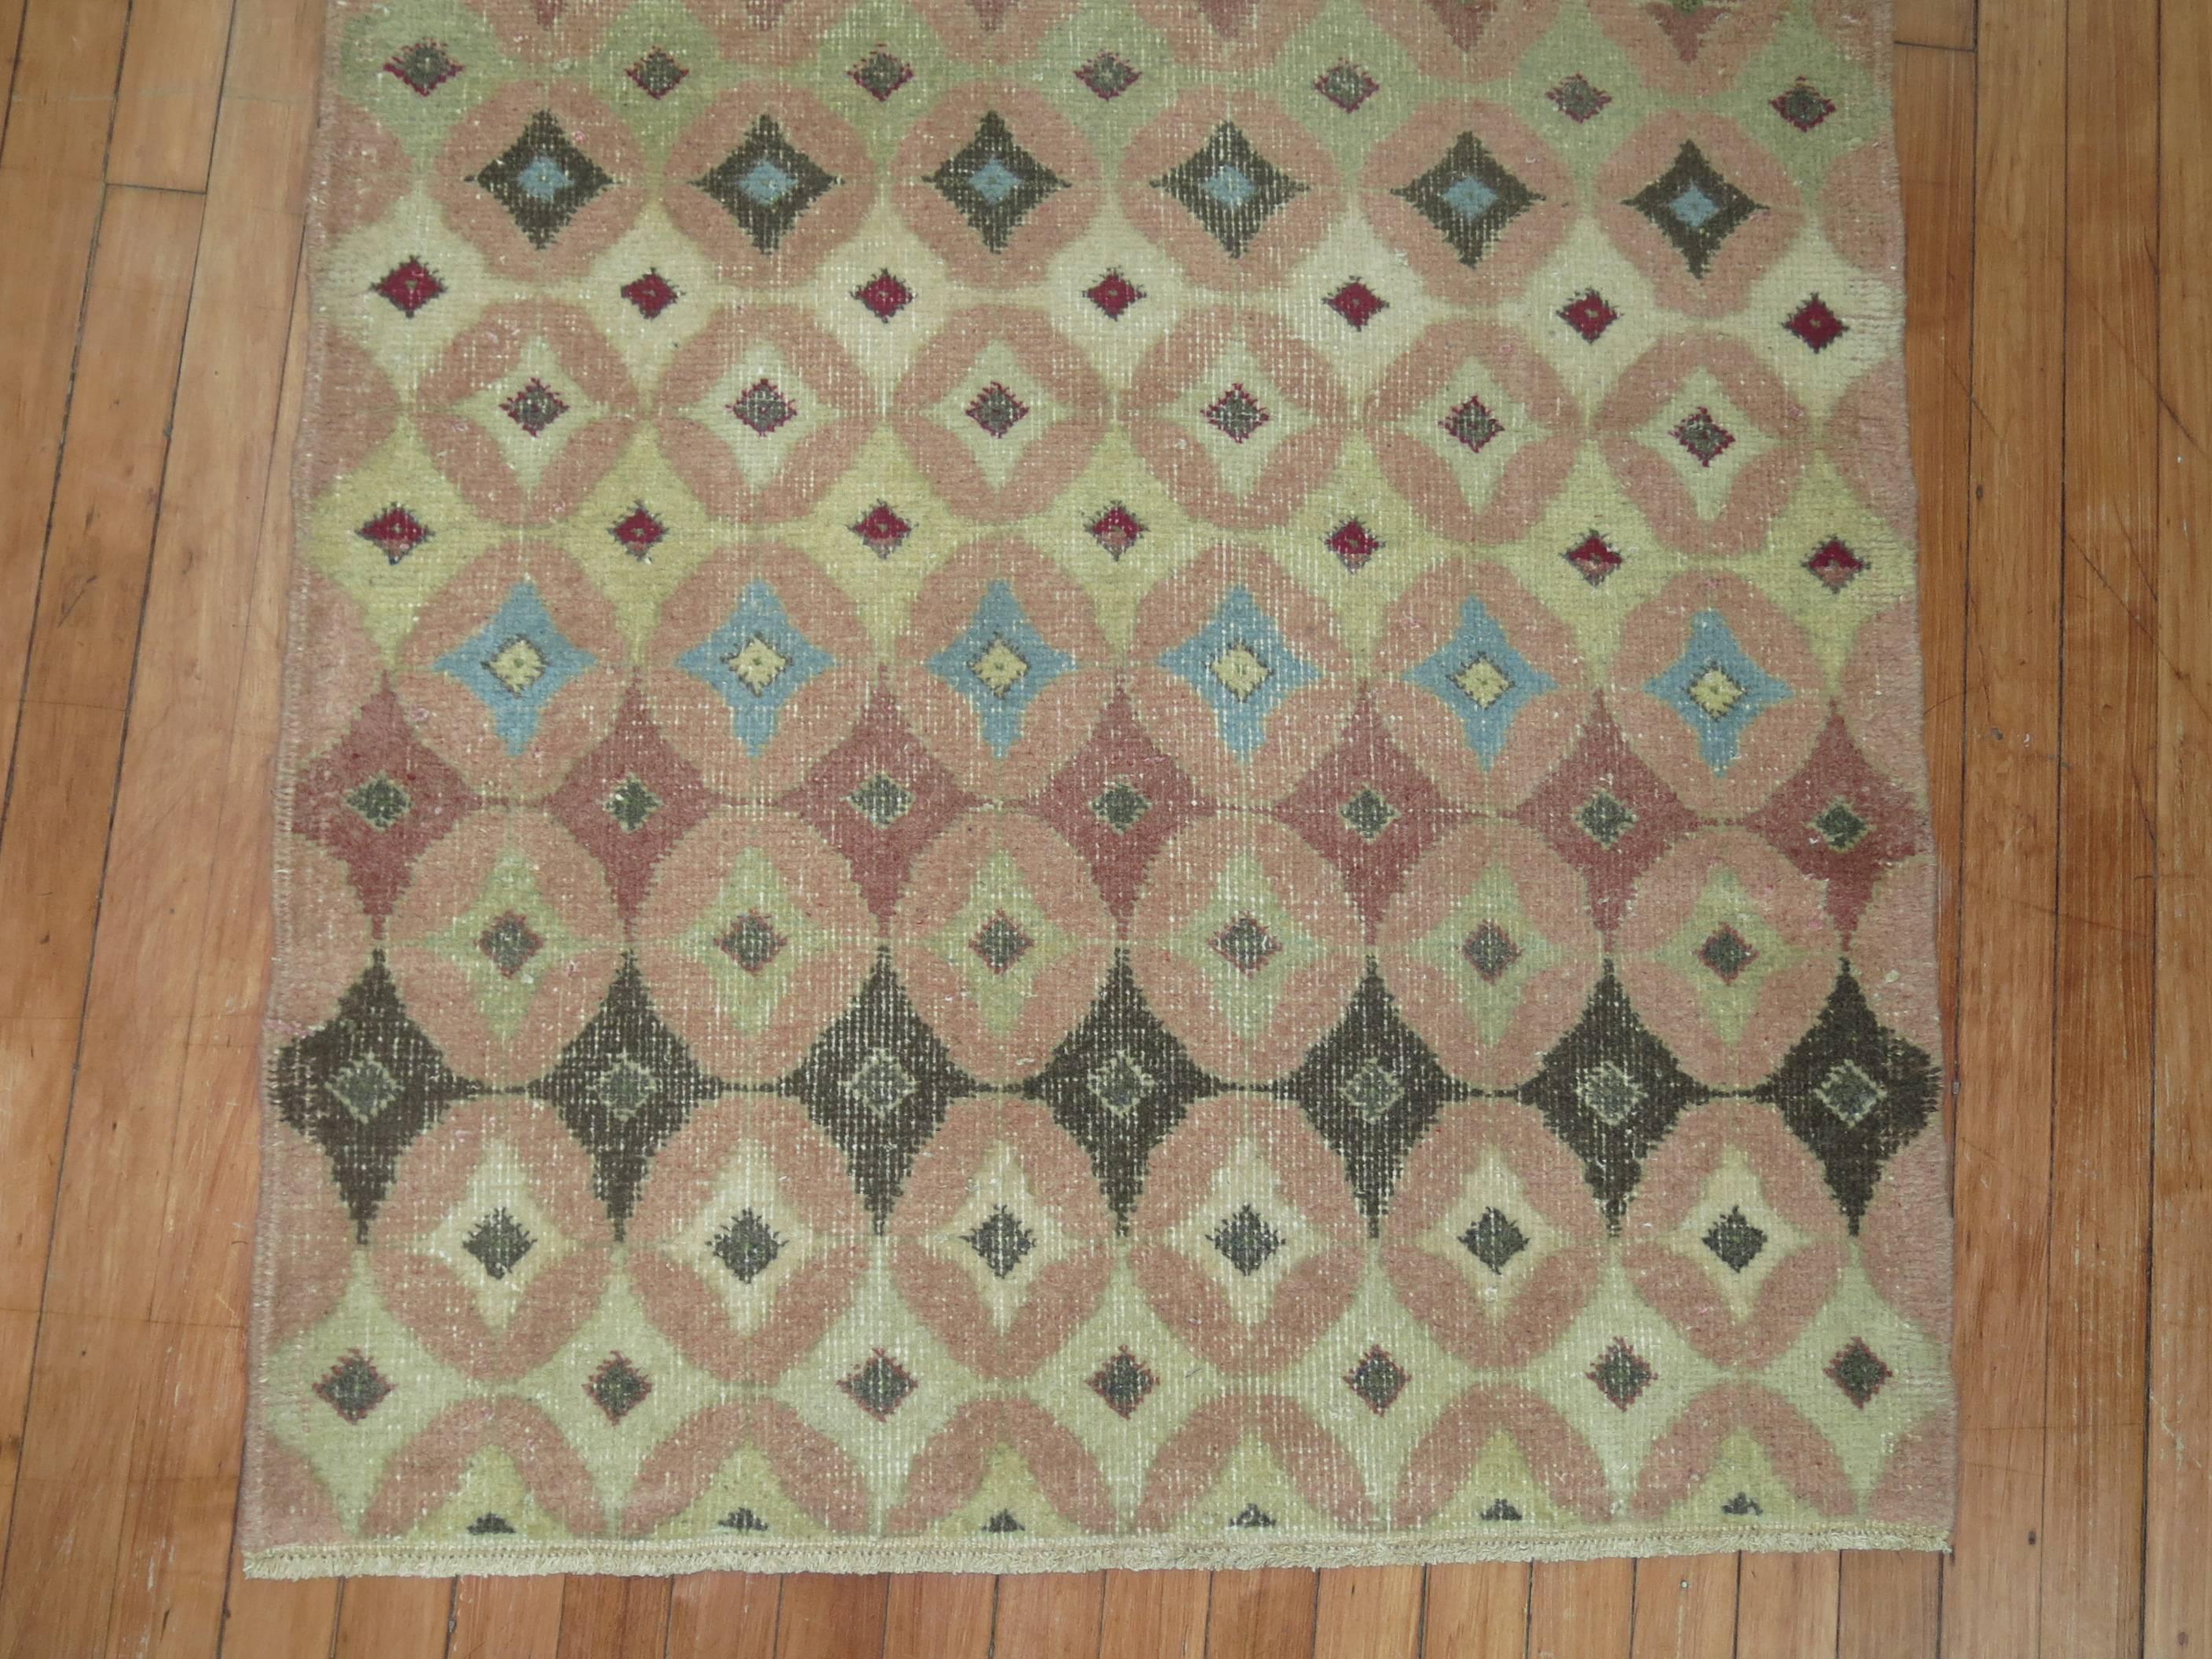 Pair of vintage Turkish deco rugs in an assortment of colors. 

Measuring: 3' x 4' and 3'1” x 4'3” respectively.